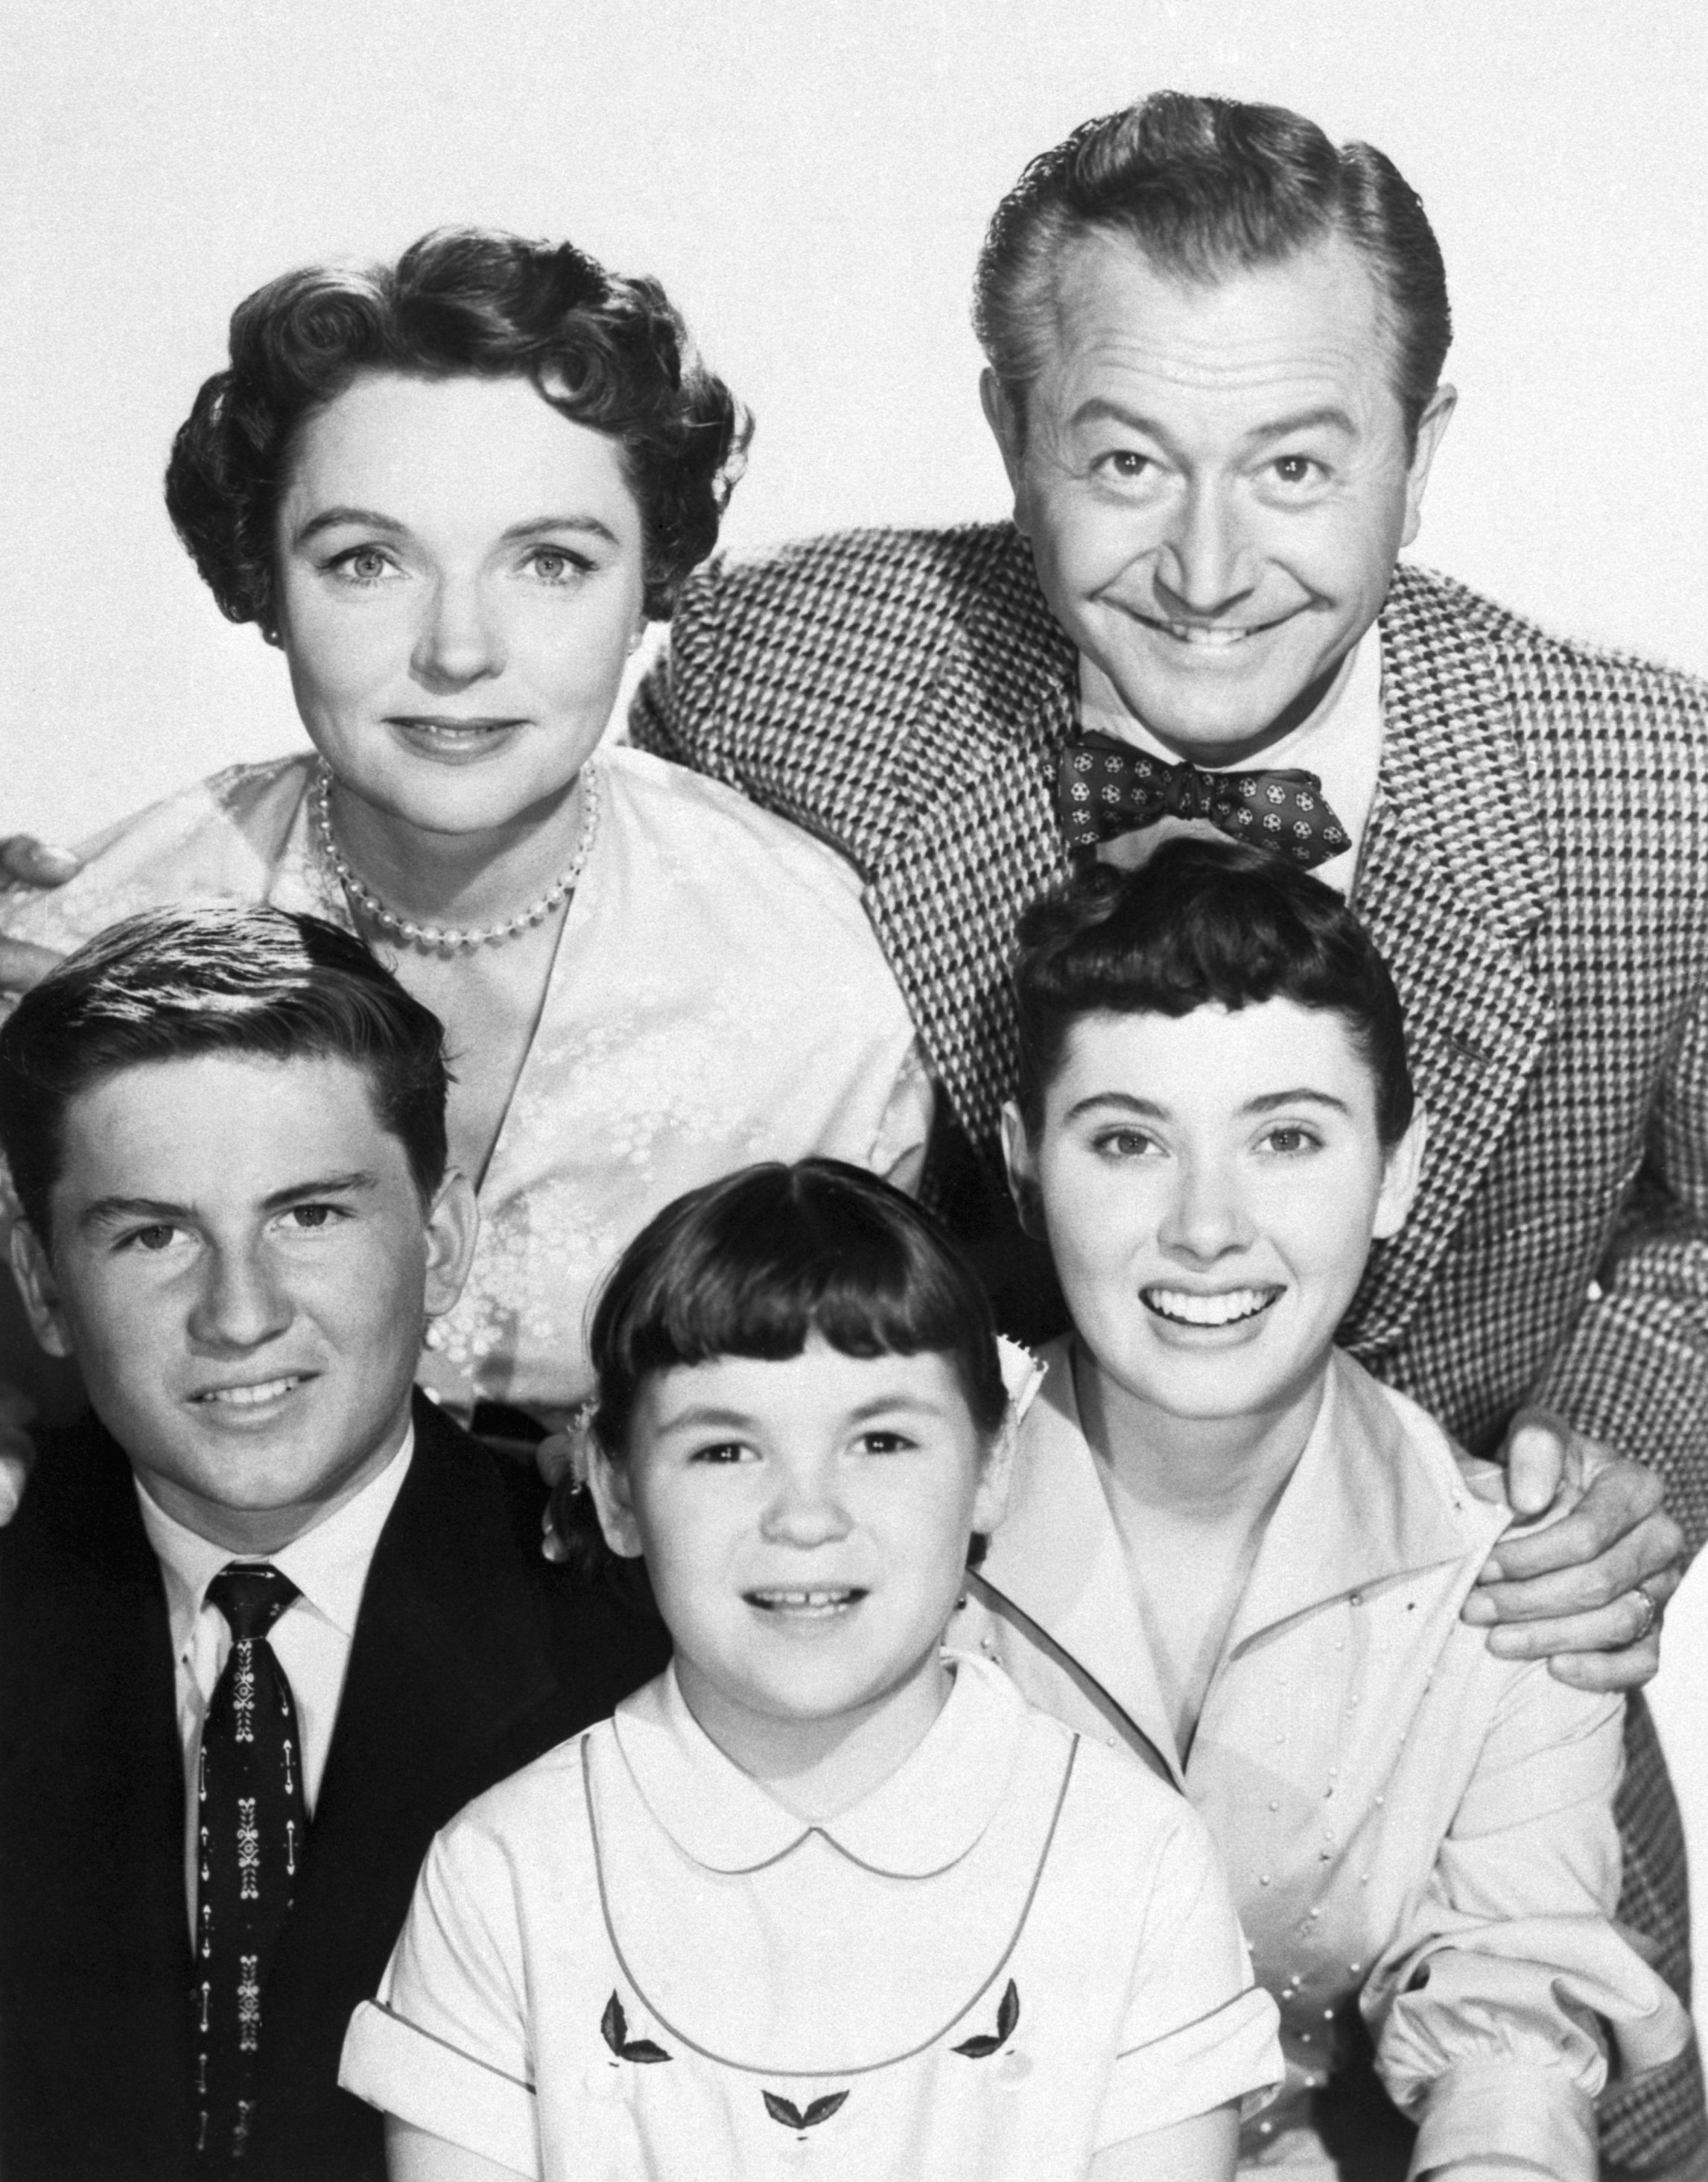  Robert Young and Jane Wyatt with the TV family from the show "Father Knows Best" circa 1950s. | Source: Getty Images